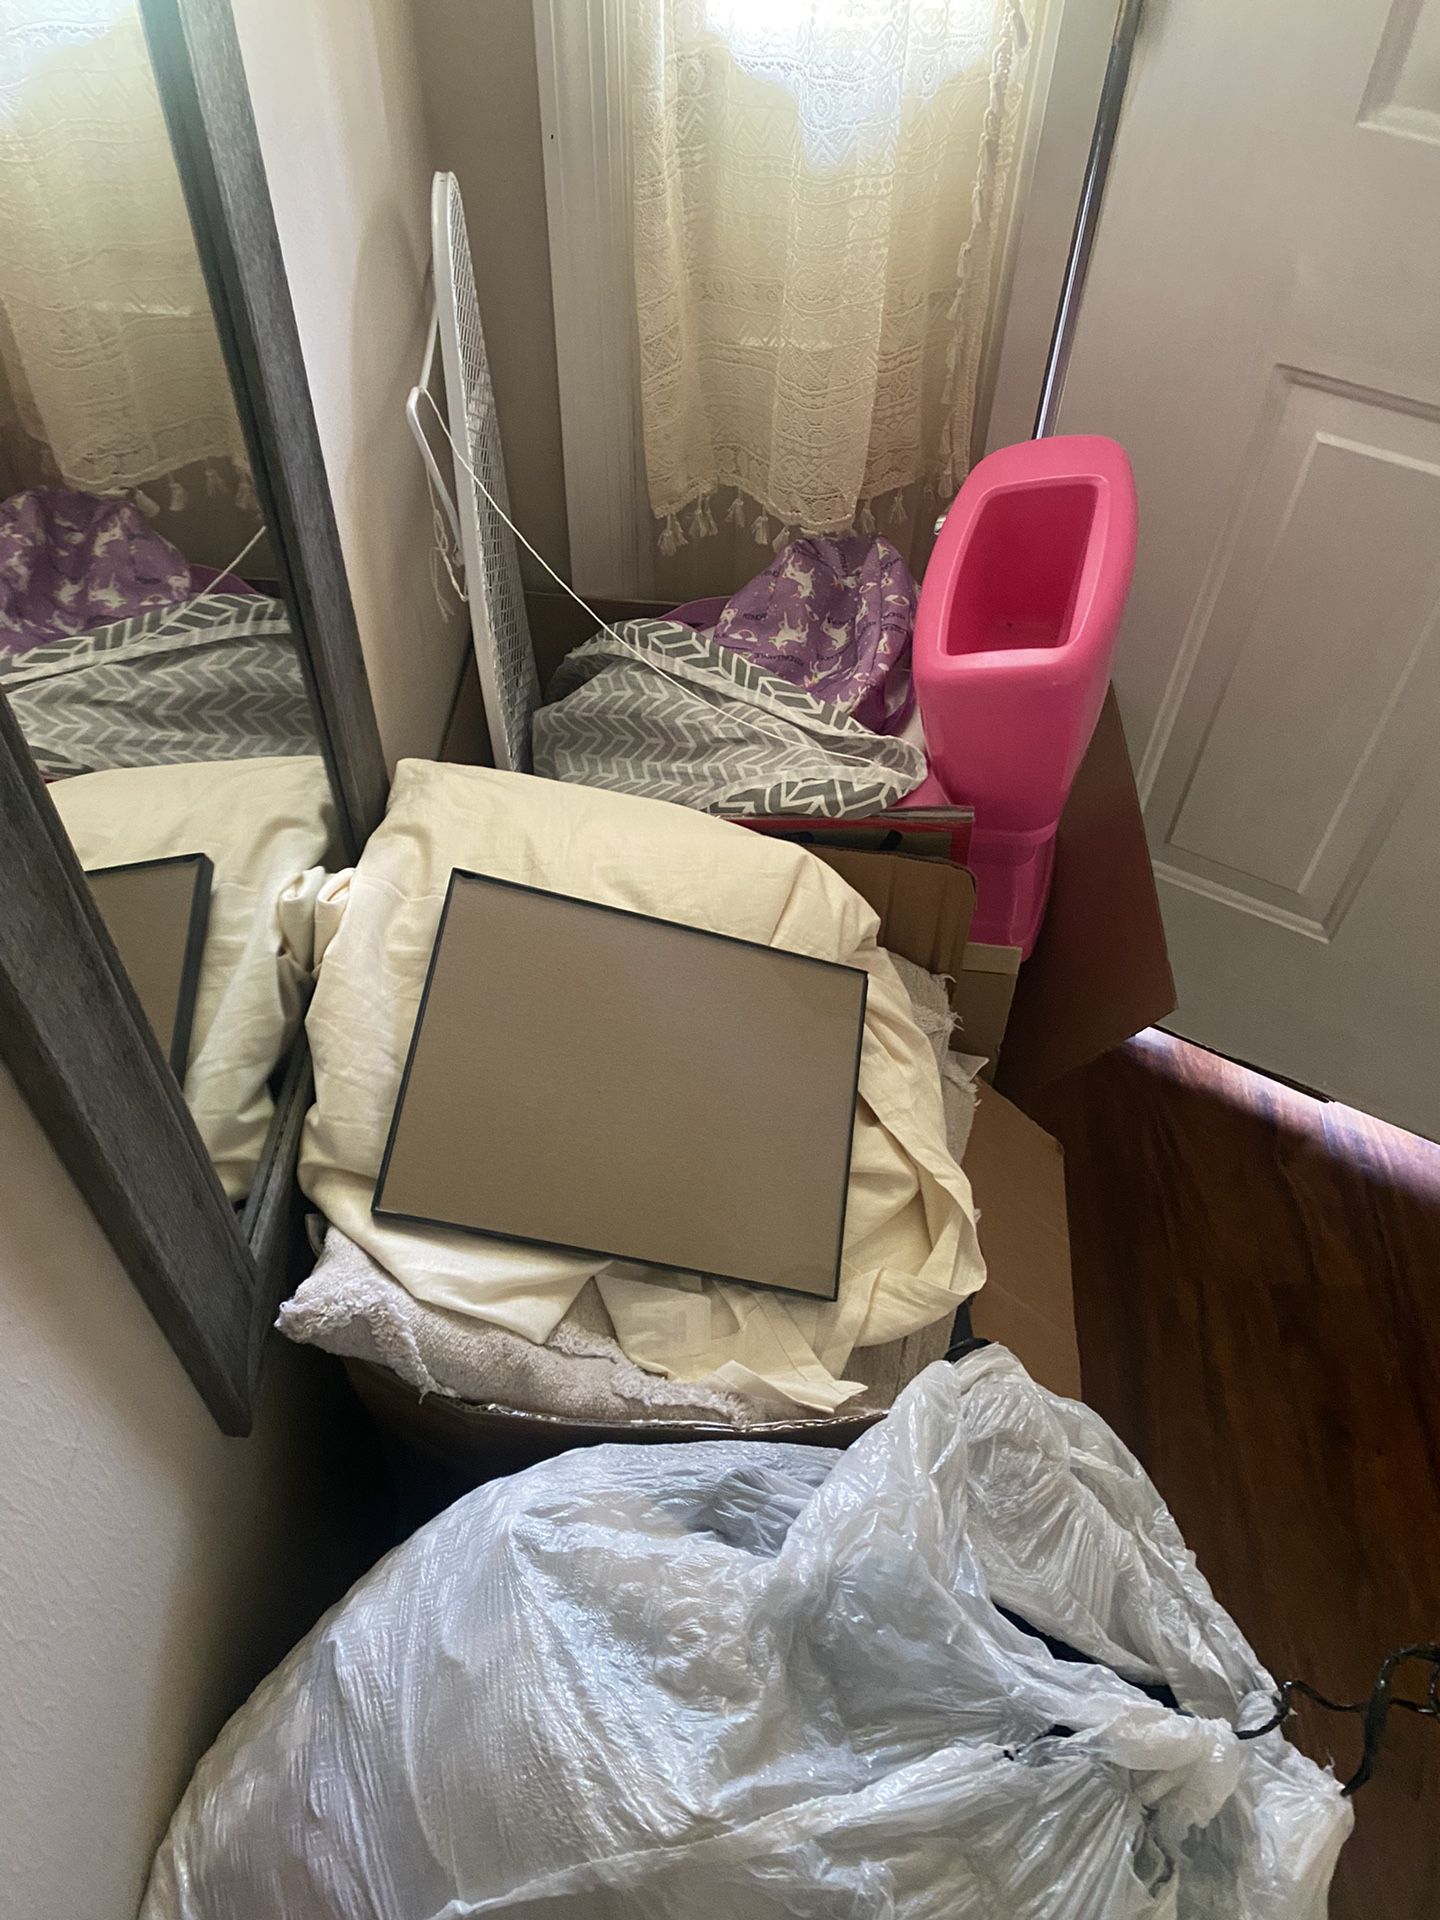 Free Baby Clothes, Toys, Baby Toilet (new) 